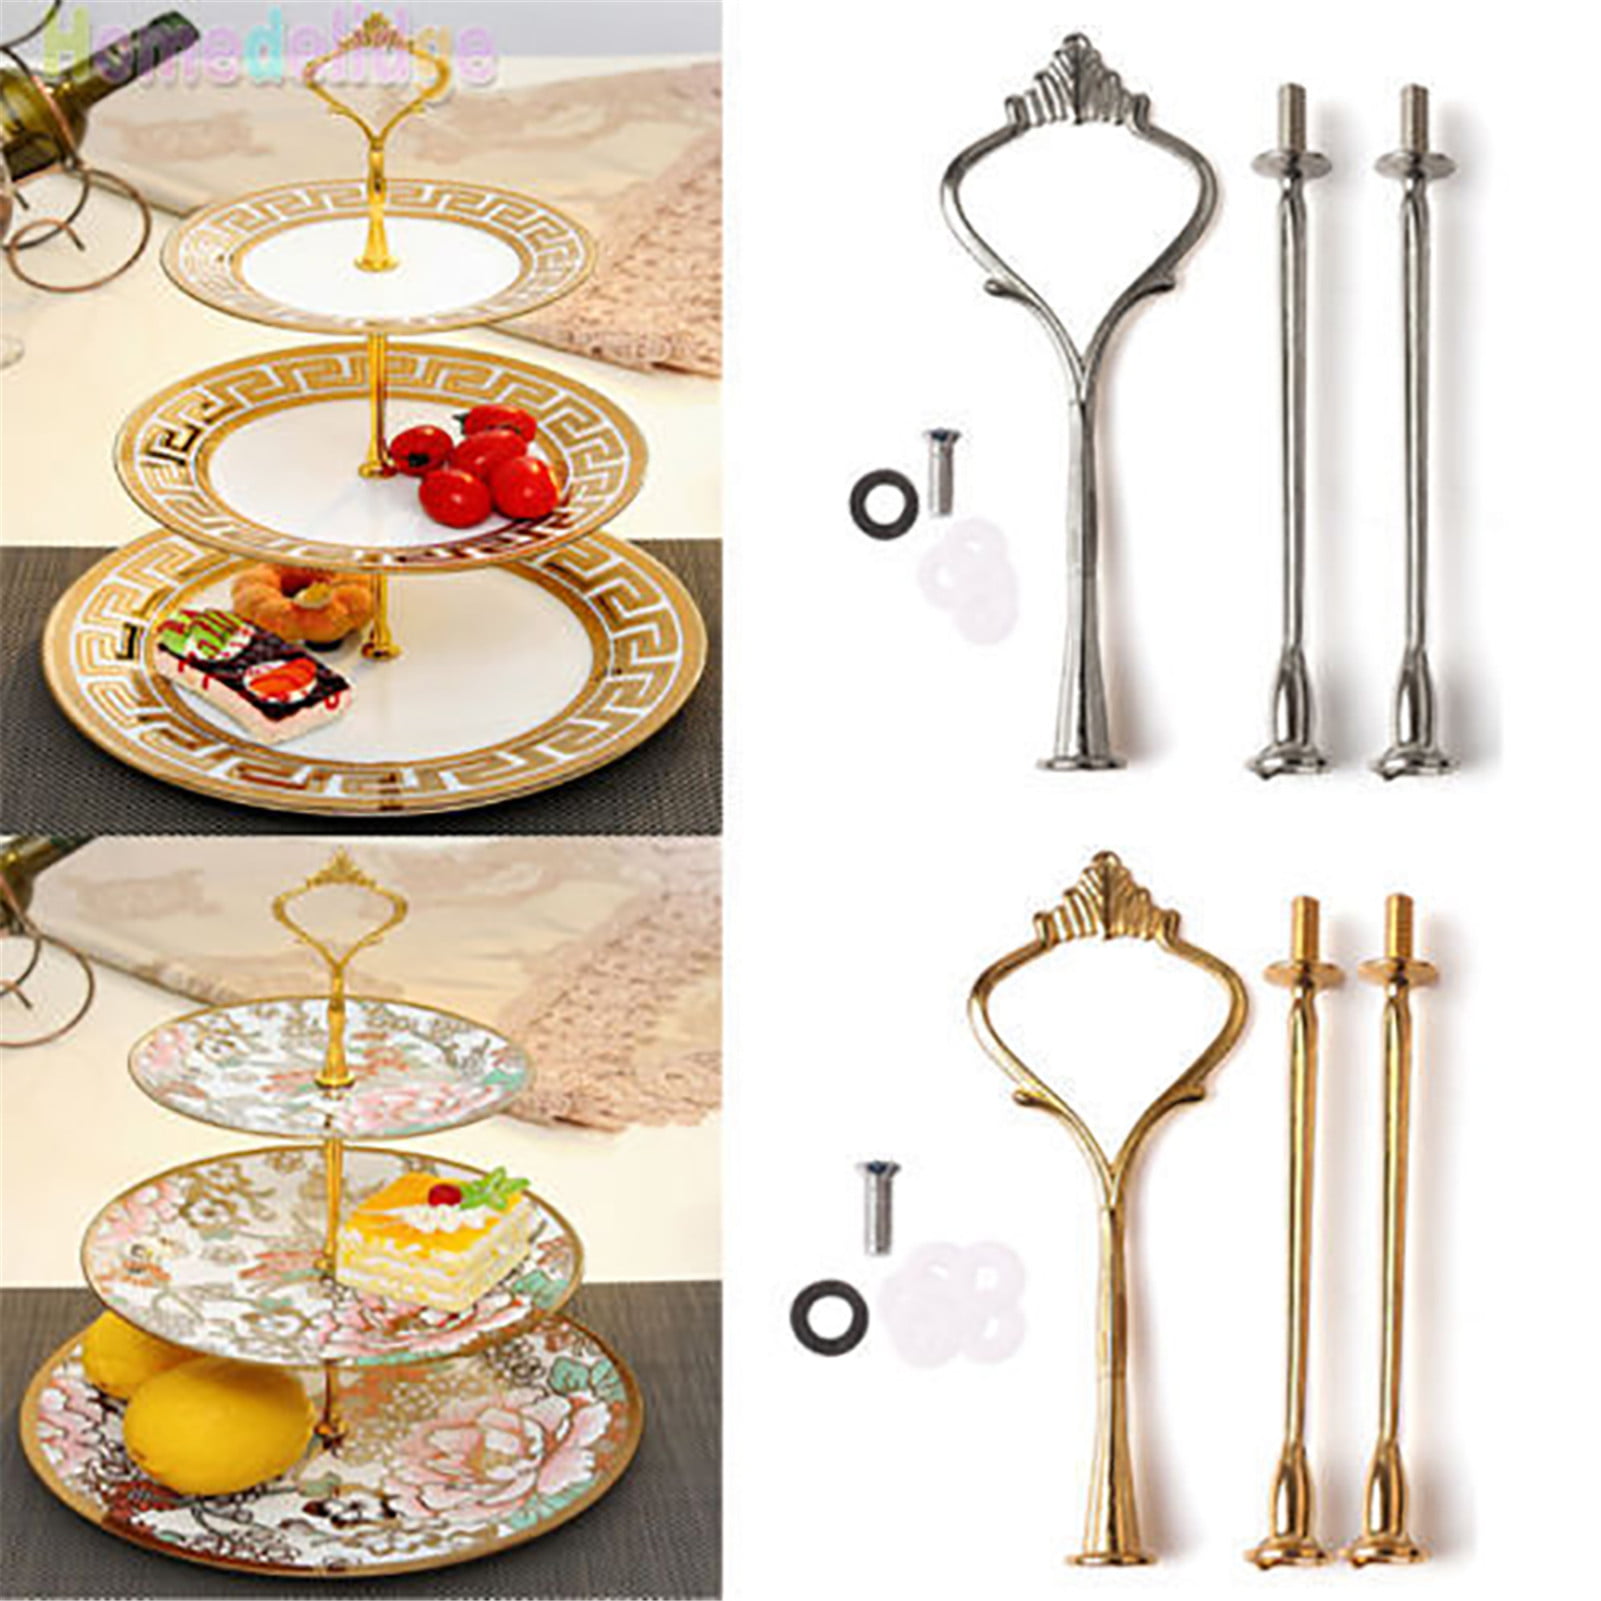 3 Tier Cake Round Plate Stand Handle Fitting Hardware Rod Cupcake Plate JB 